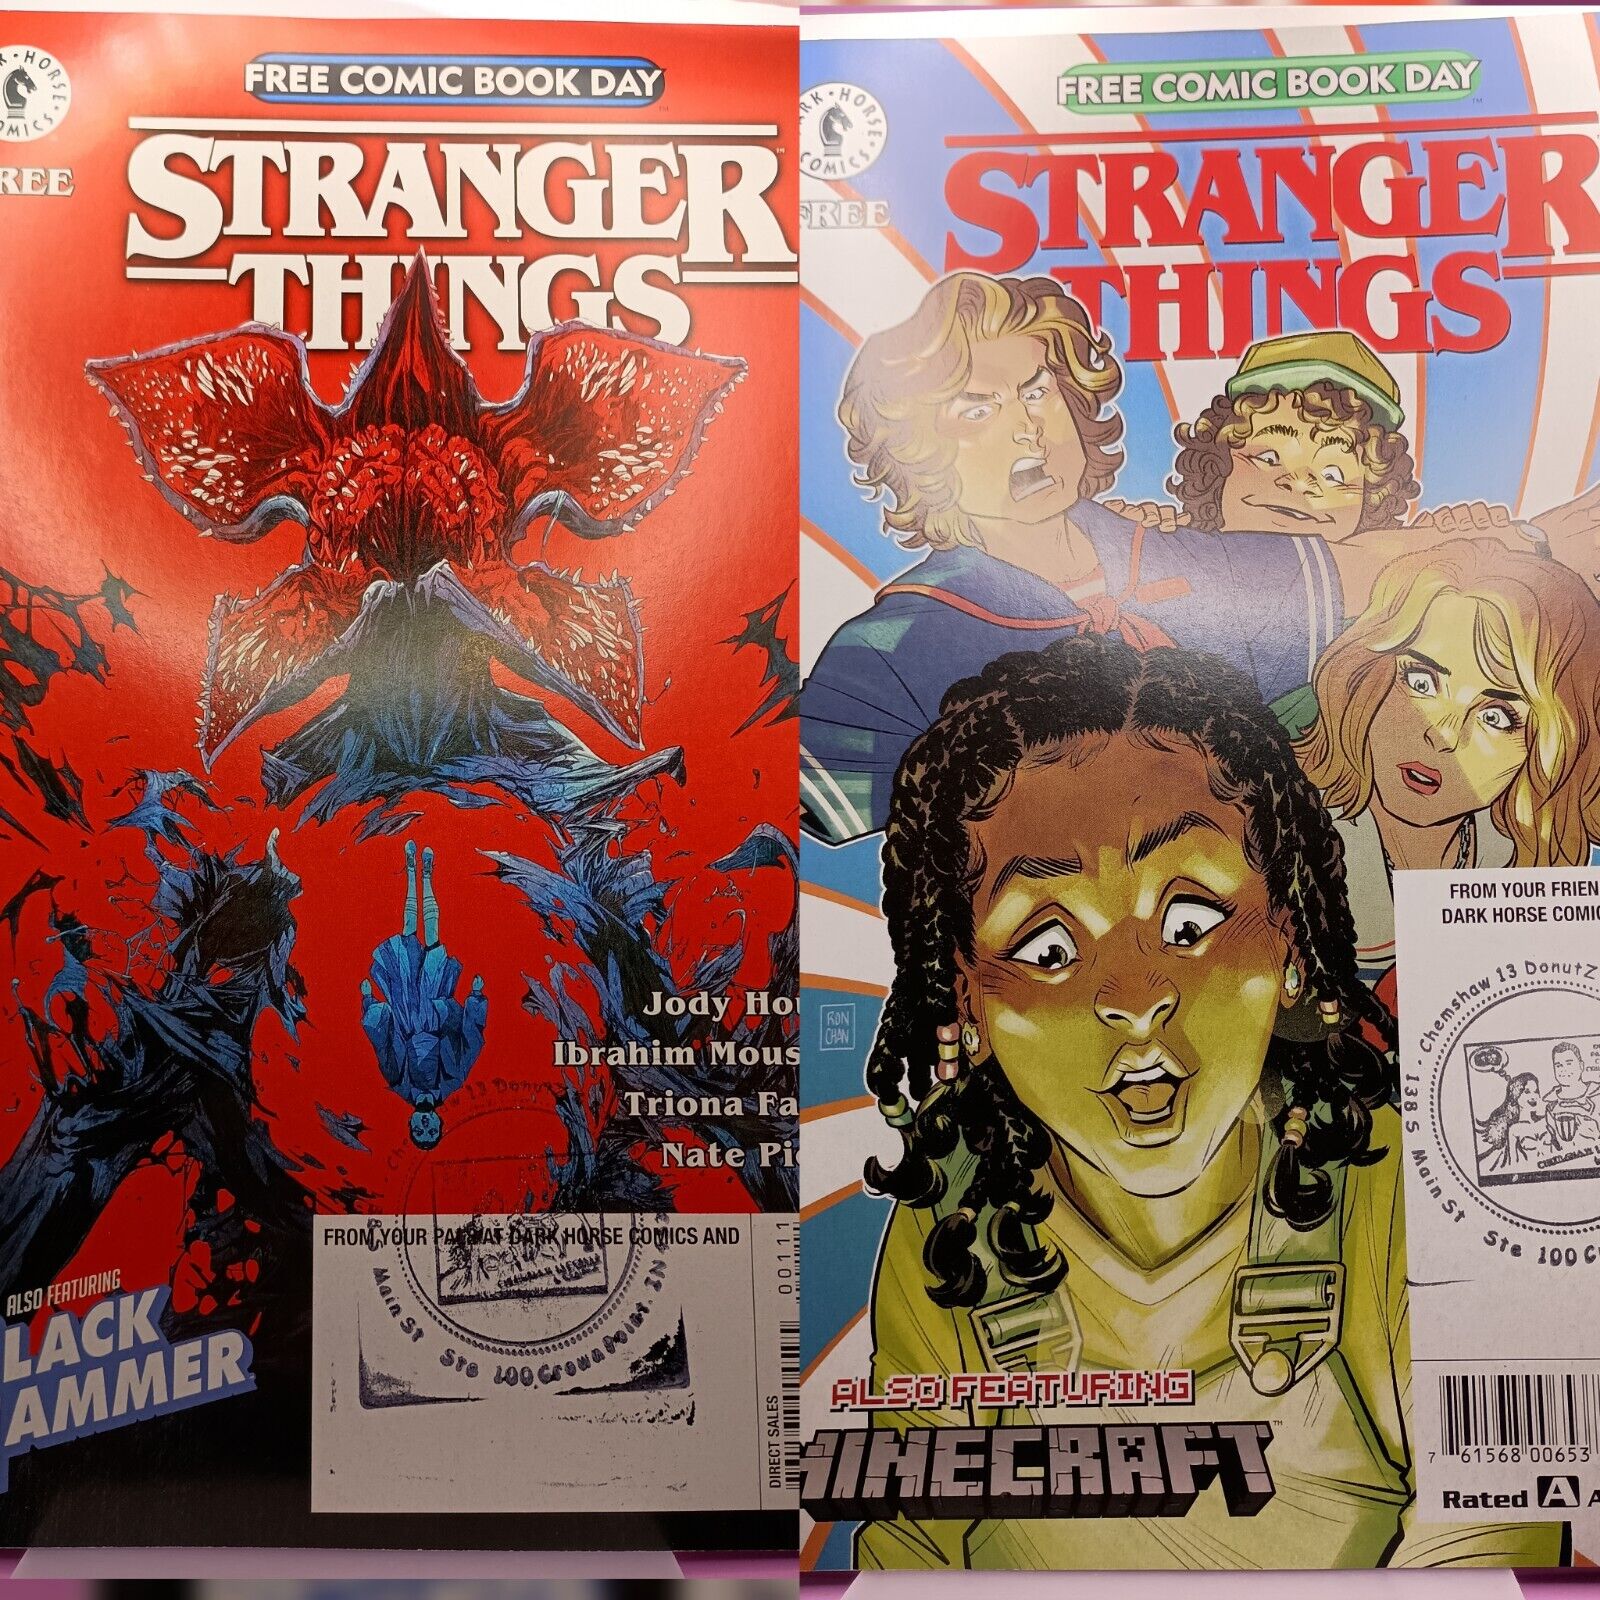 STAMPED 2019-20 FCBD Stranger Things Set Promotional Giveaway Comic Books FREE S